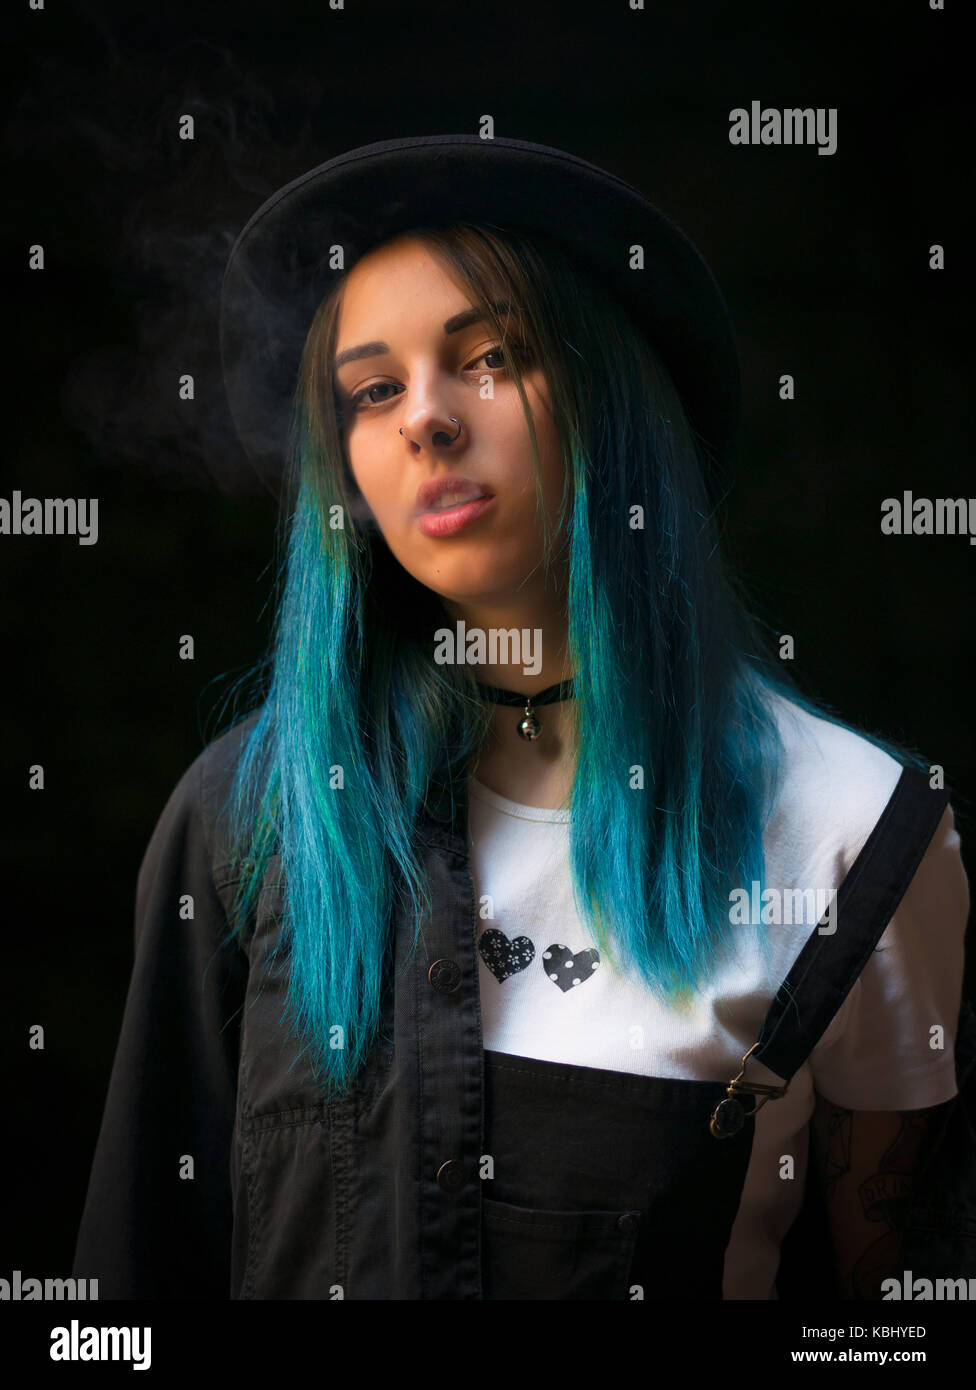 Emo girl smoking cigarette.Street punk or hipster woman with blue colorful dyed hair, hat, piercing,lenses,ears tunnels and unusual hairstyle stands i Stock Photo